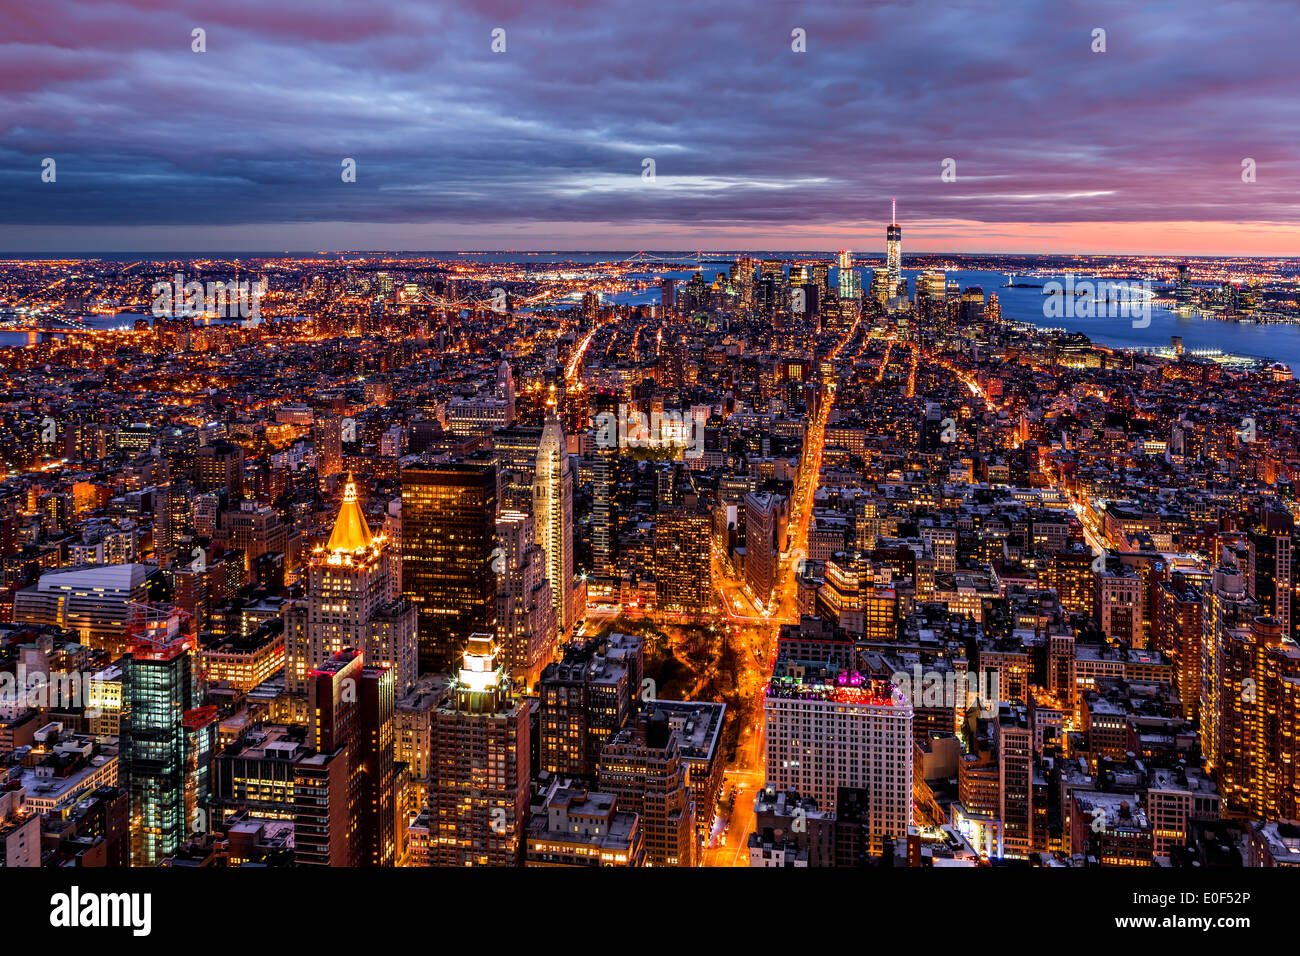 Aerial view over New York at dusk Stock Photo